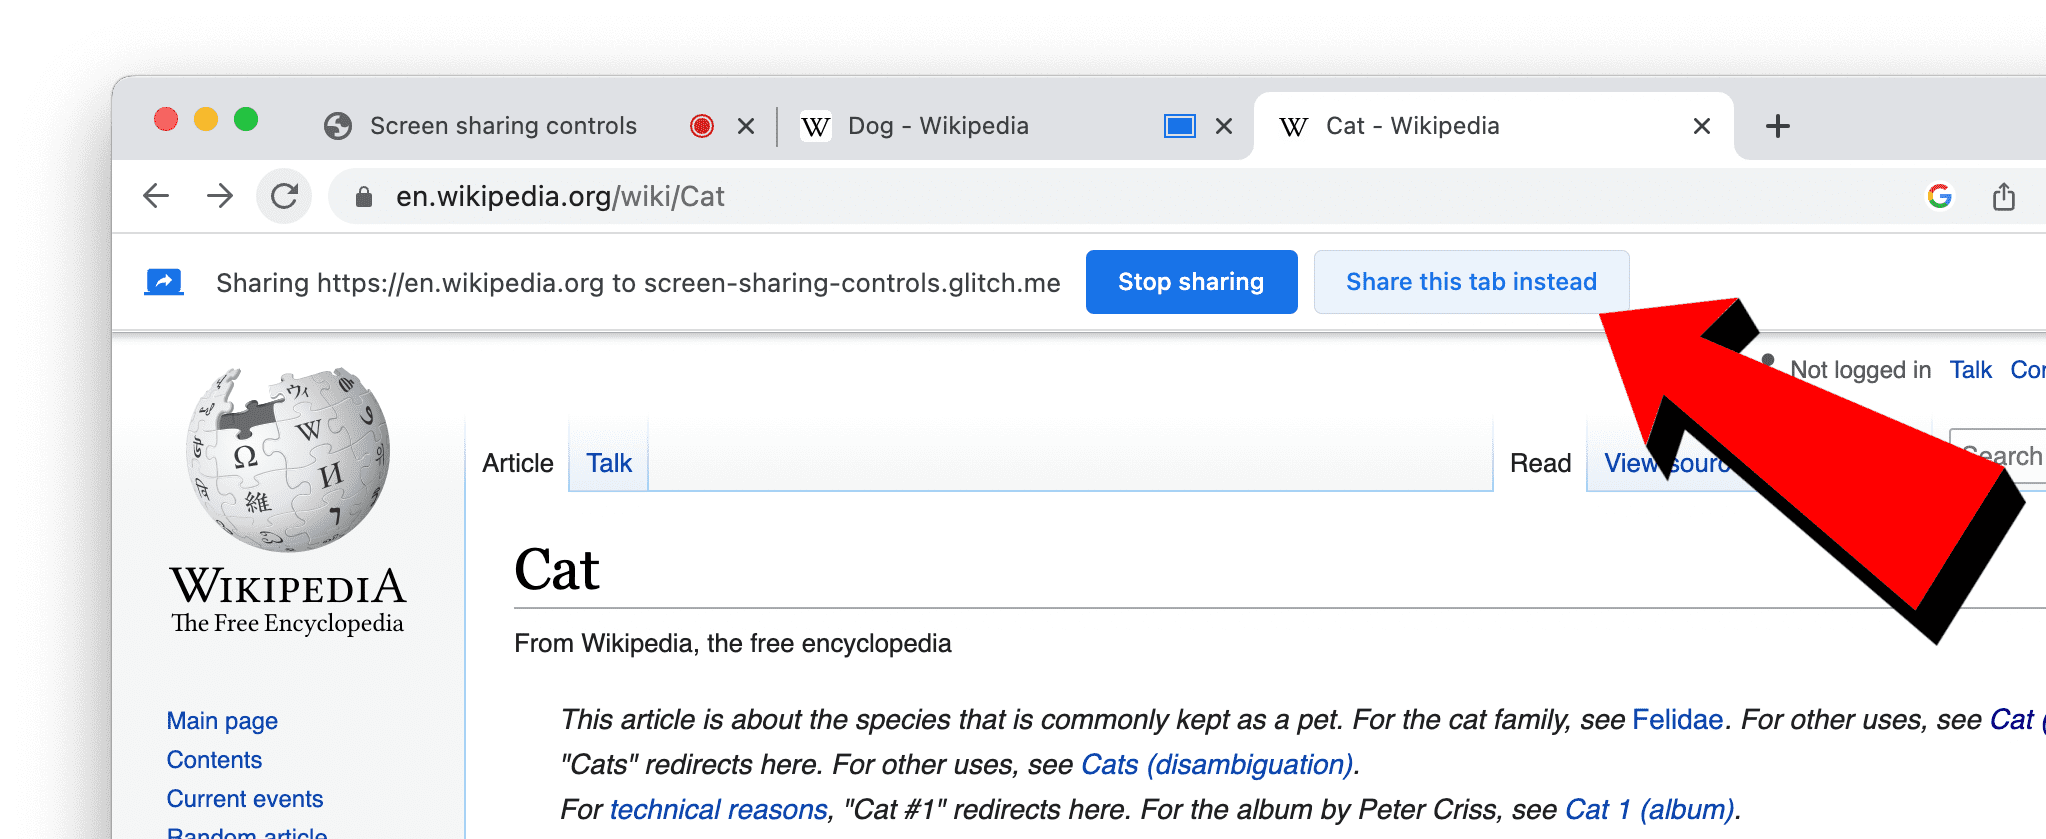 Screenshot of the button used to dynamically switch between sharing different tabs